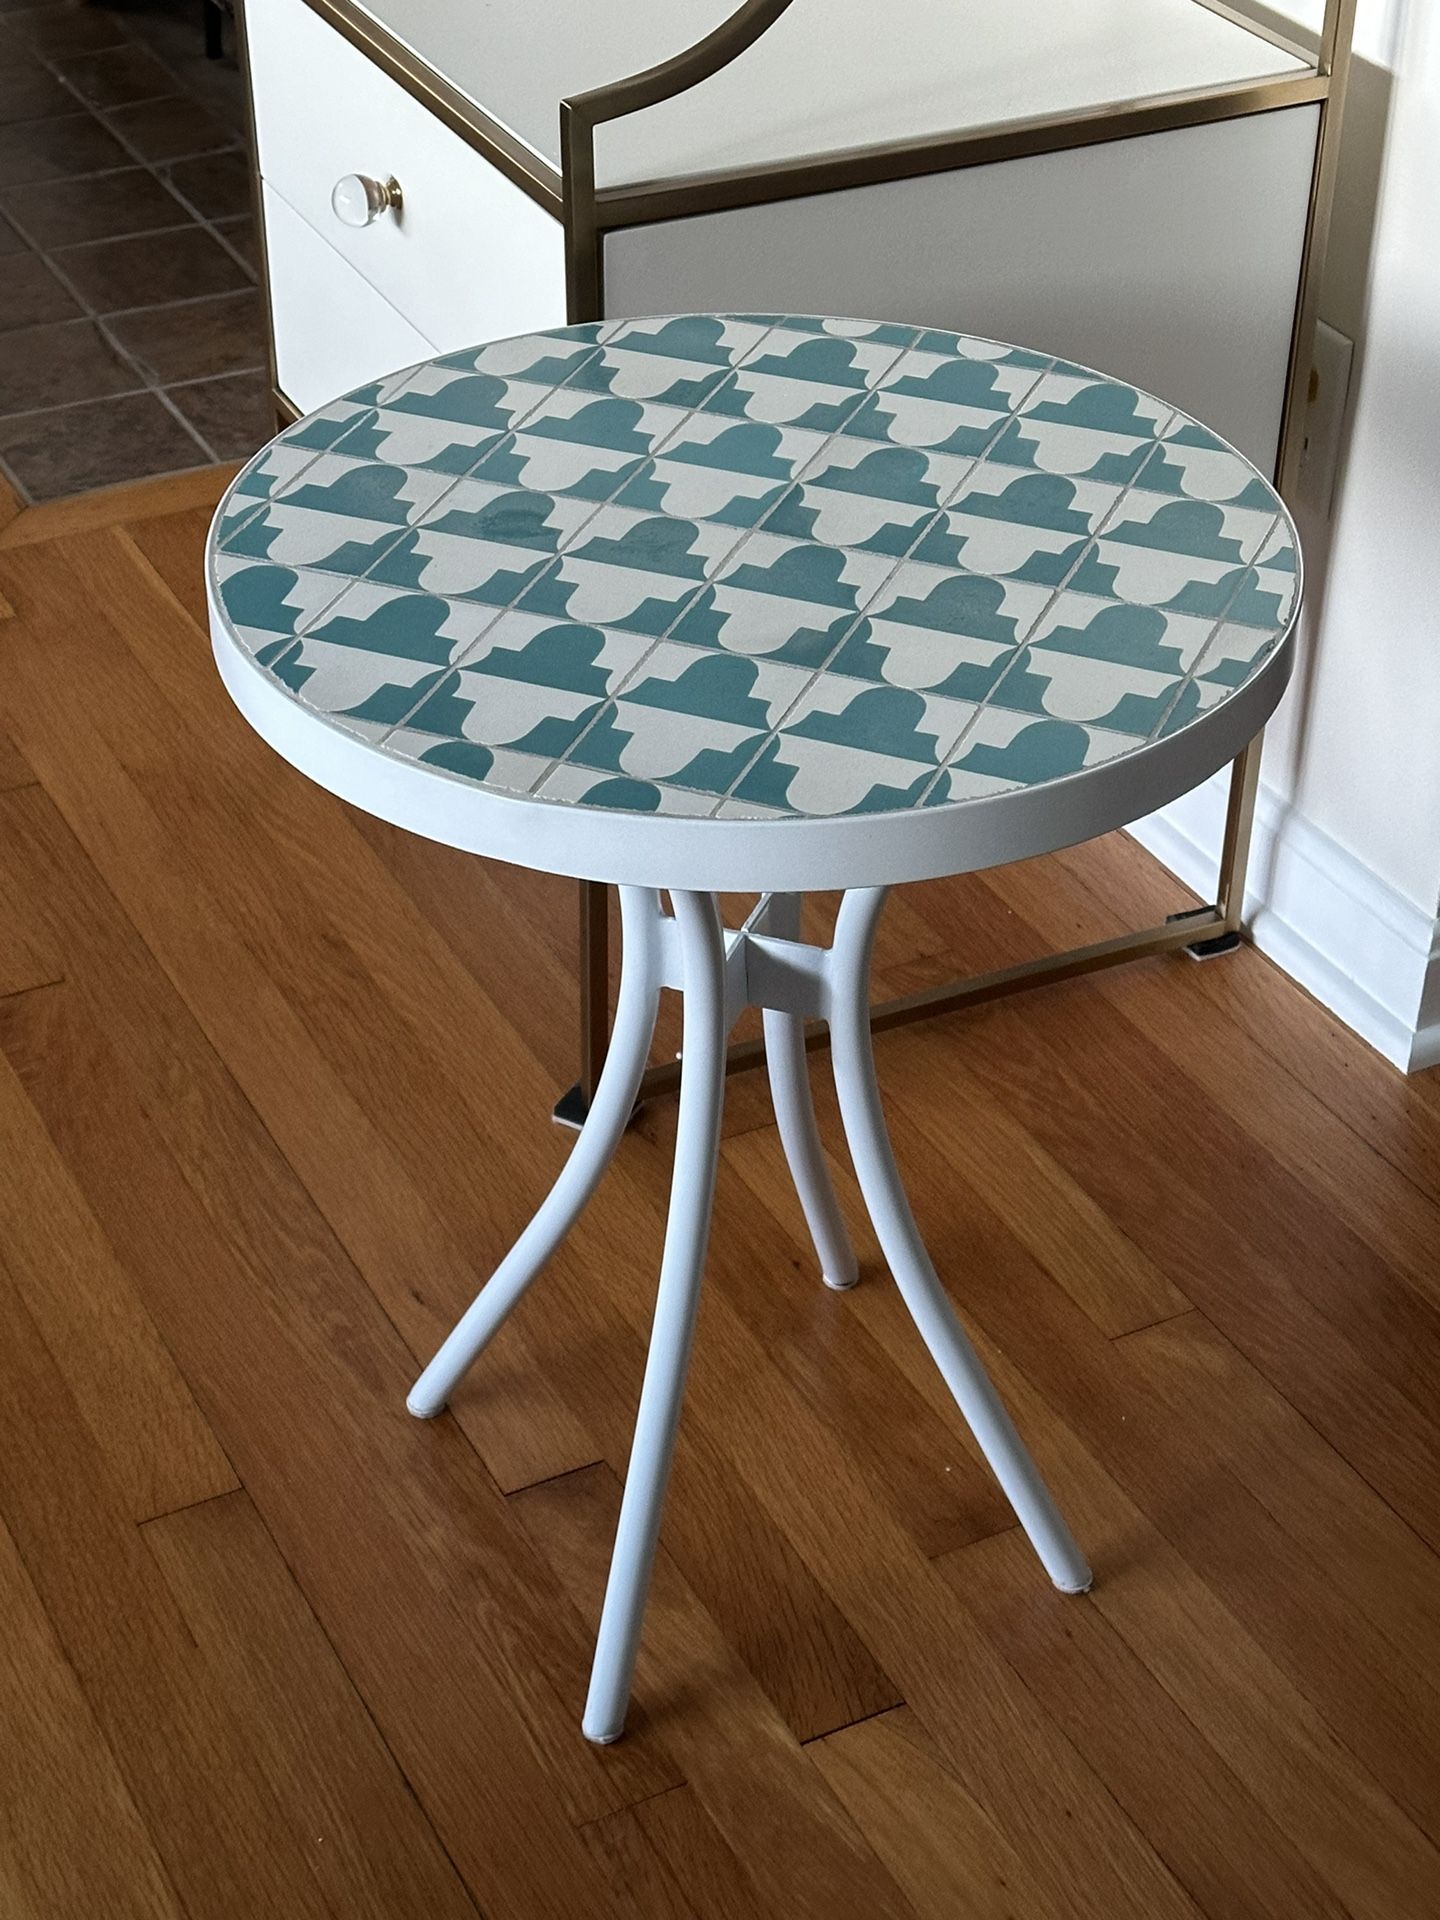 Teal & White Tile Top Table Anthropologie 